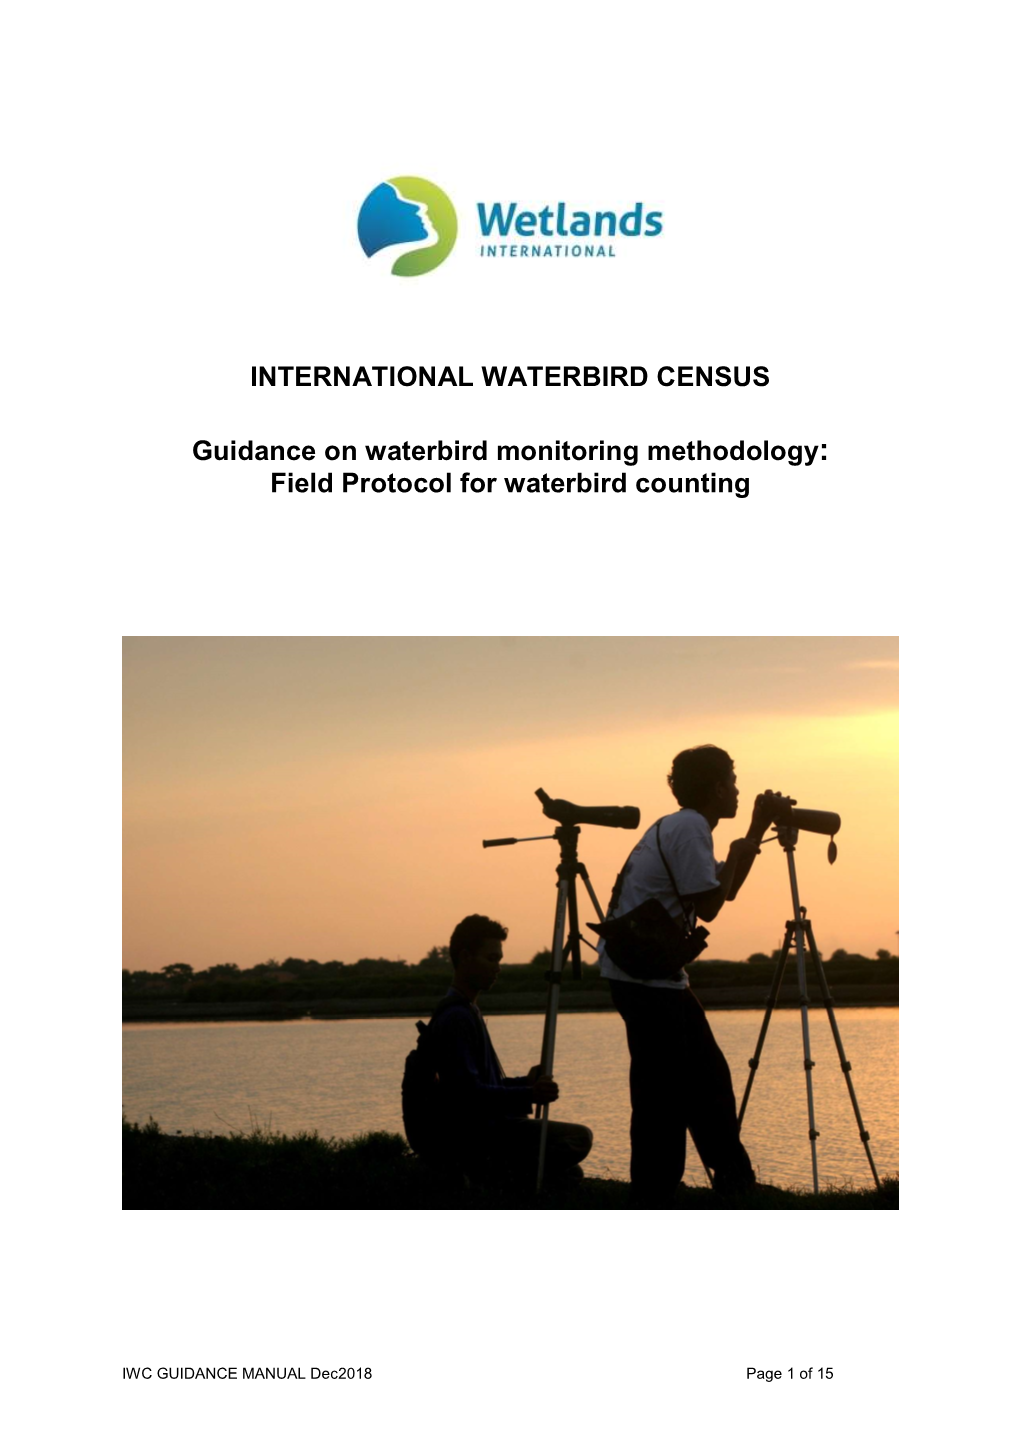 Protocol for Waterbird Counting